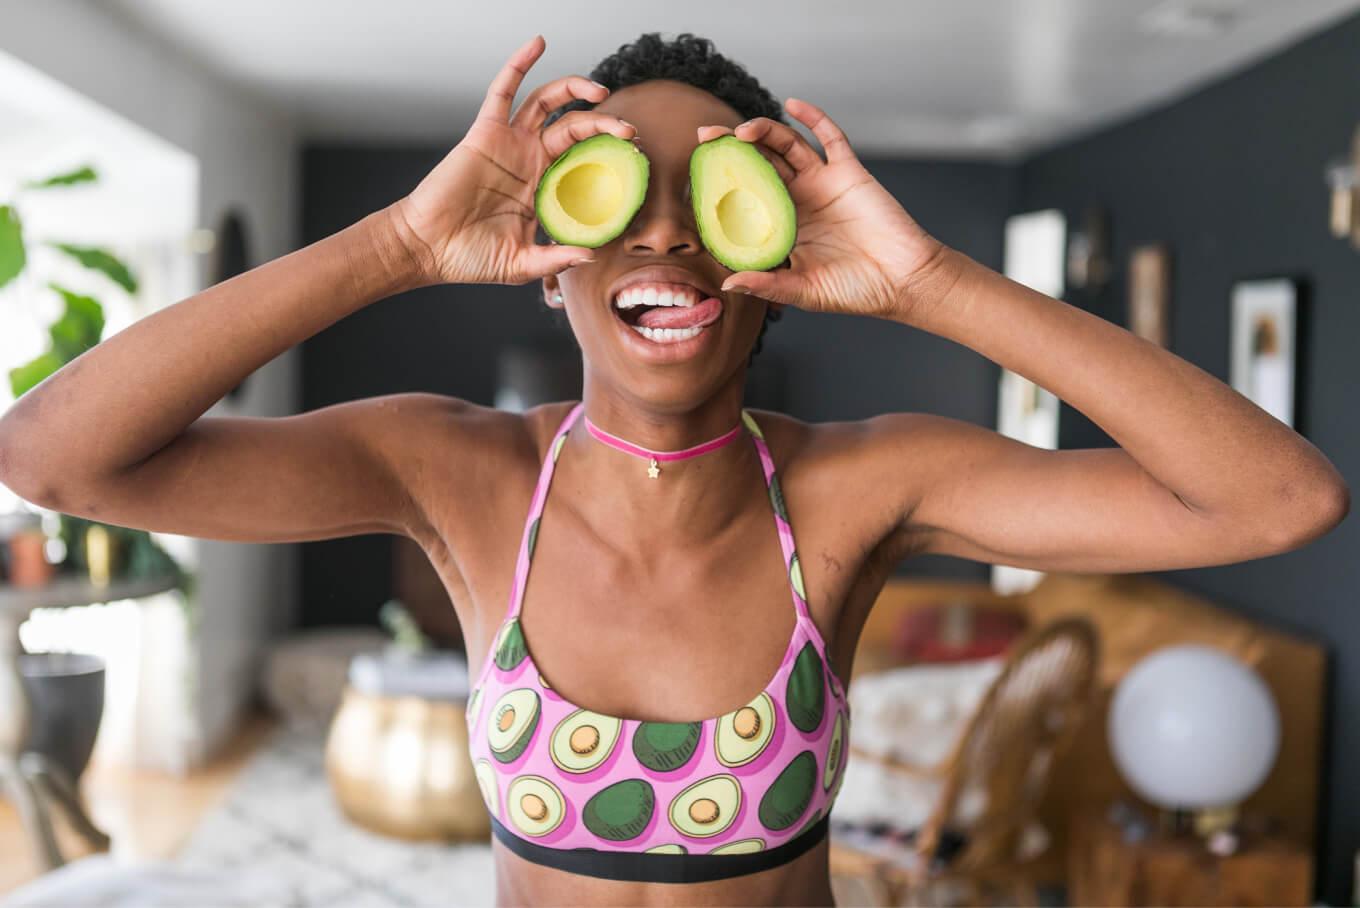 Woman wearing a MeUndies bra with an avocado pattern, holding two avocado halfs over her eyes and making a silly face